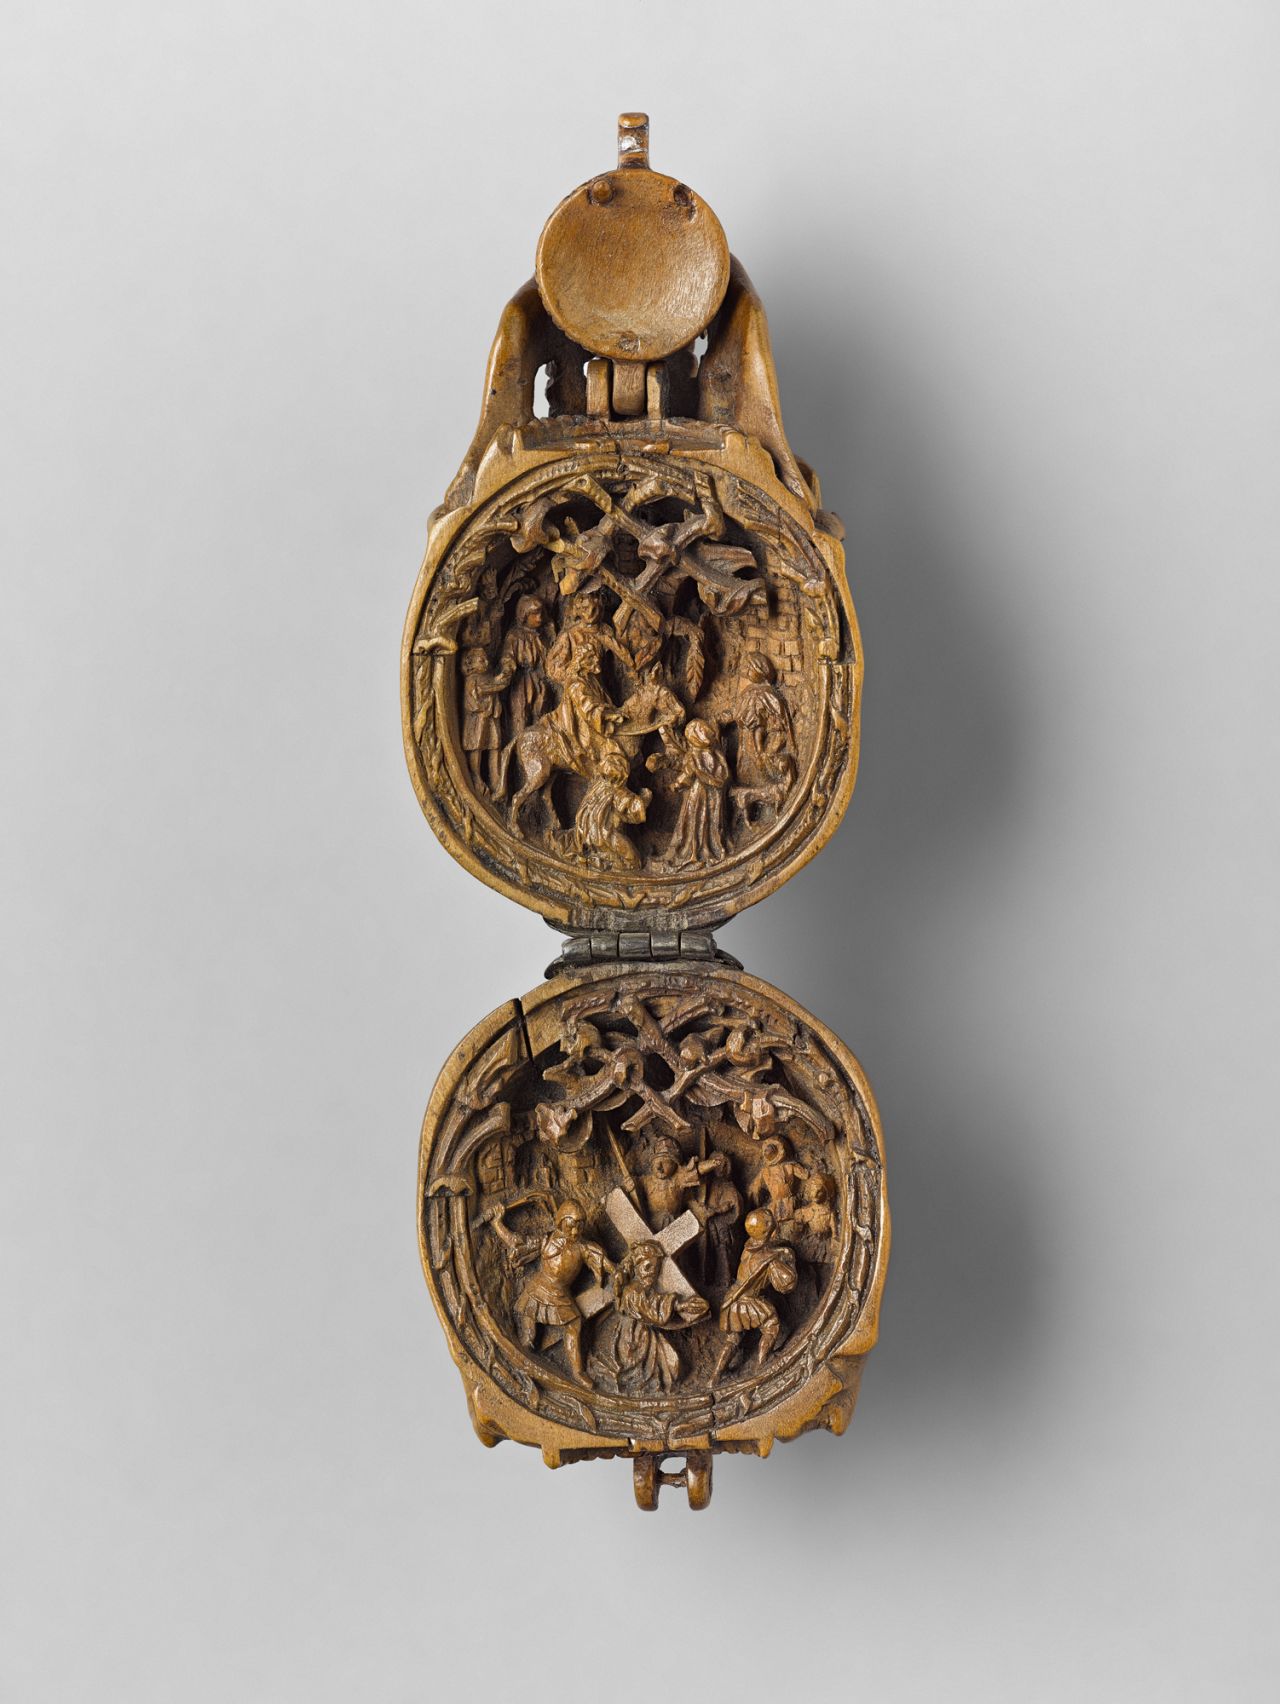 Inside one half of the skull-shaped prayer bead, Christ enters carrying the cross while being flogged 